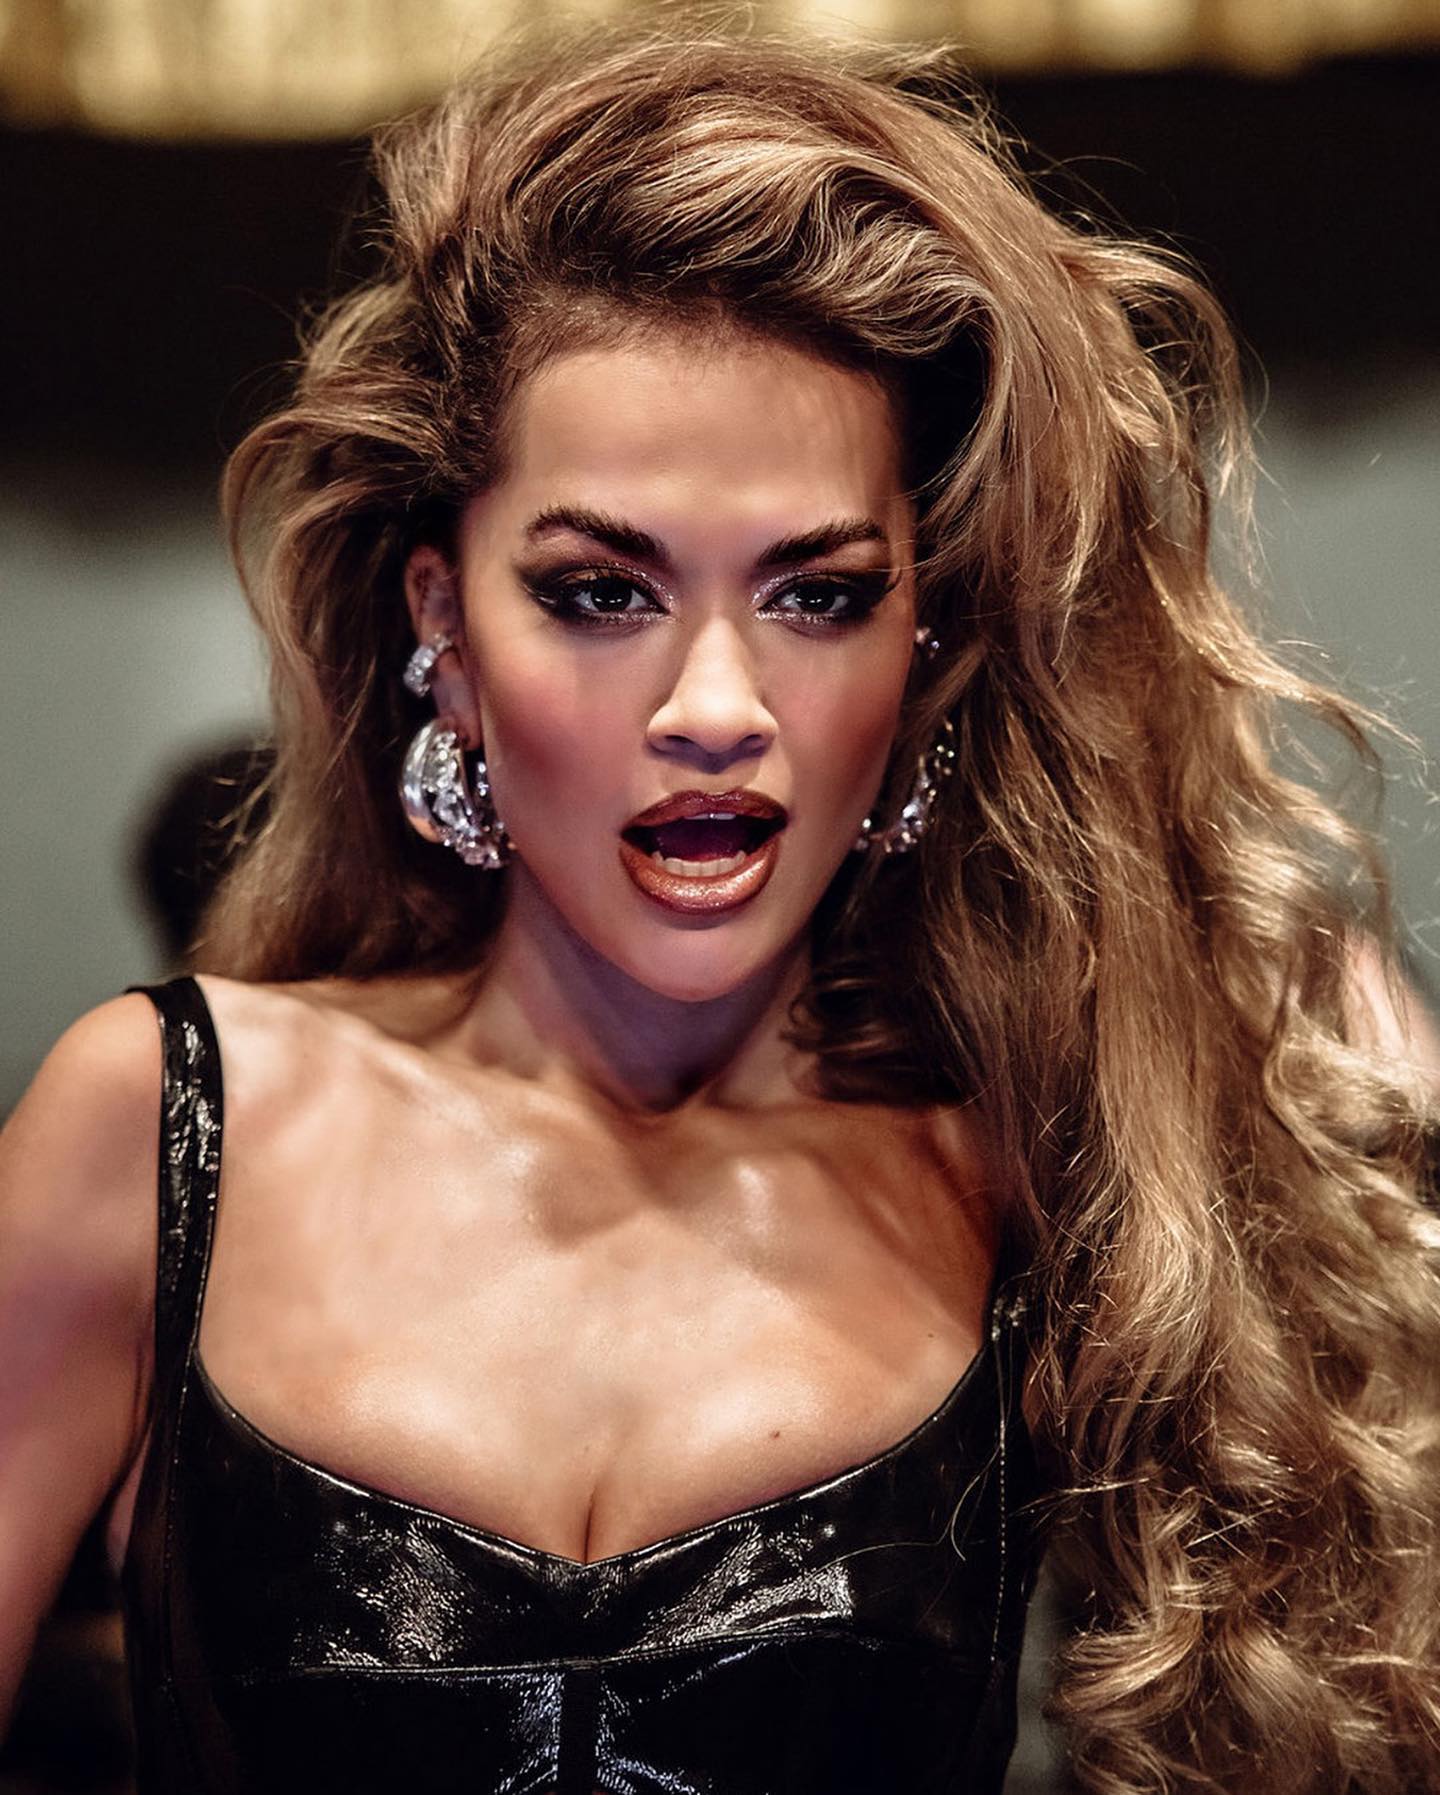 Rita Ora Wants You to Come Workout With Her! - Photo 33